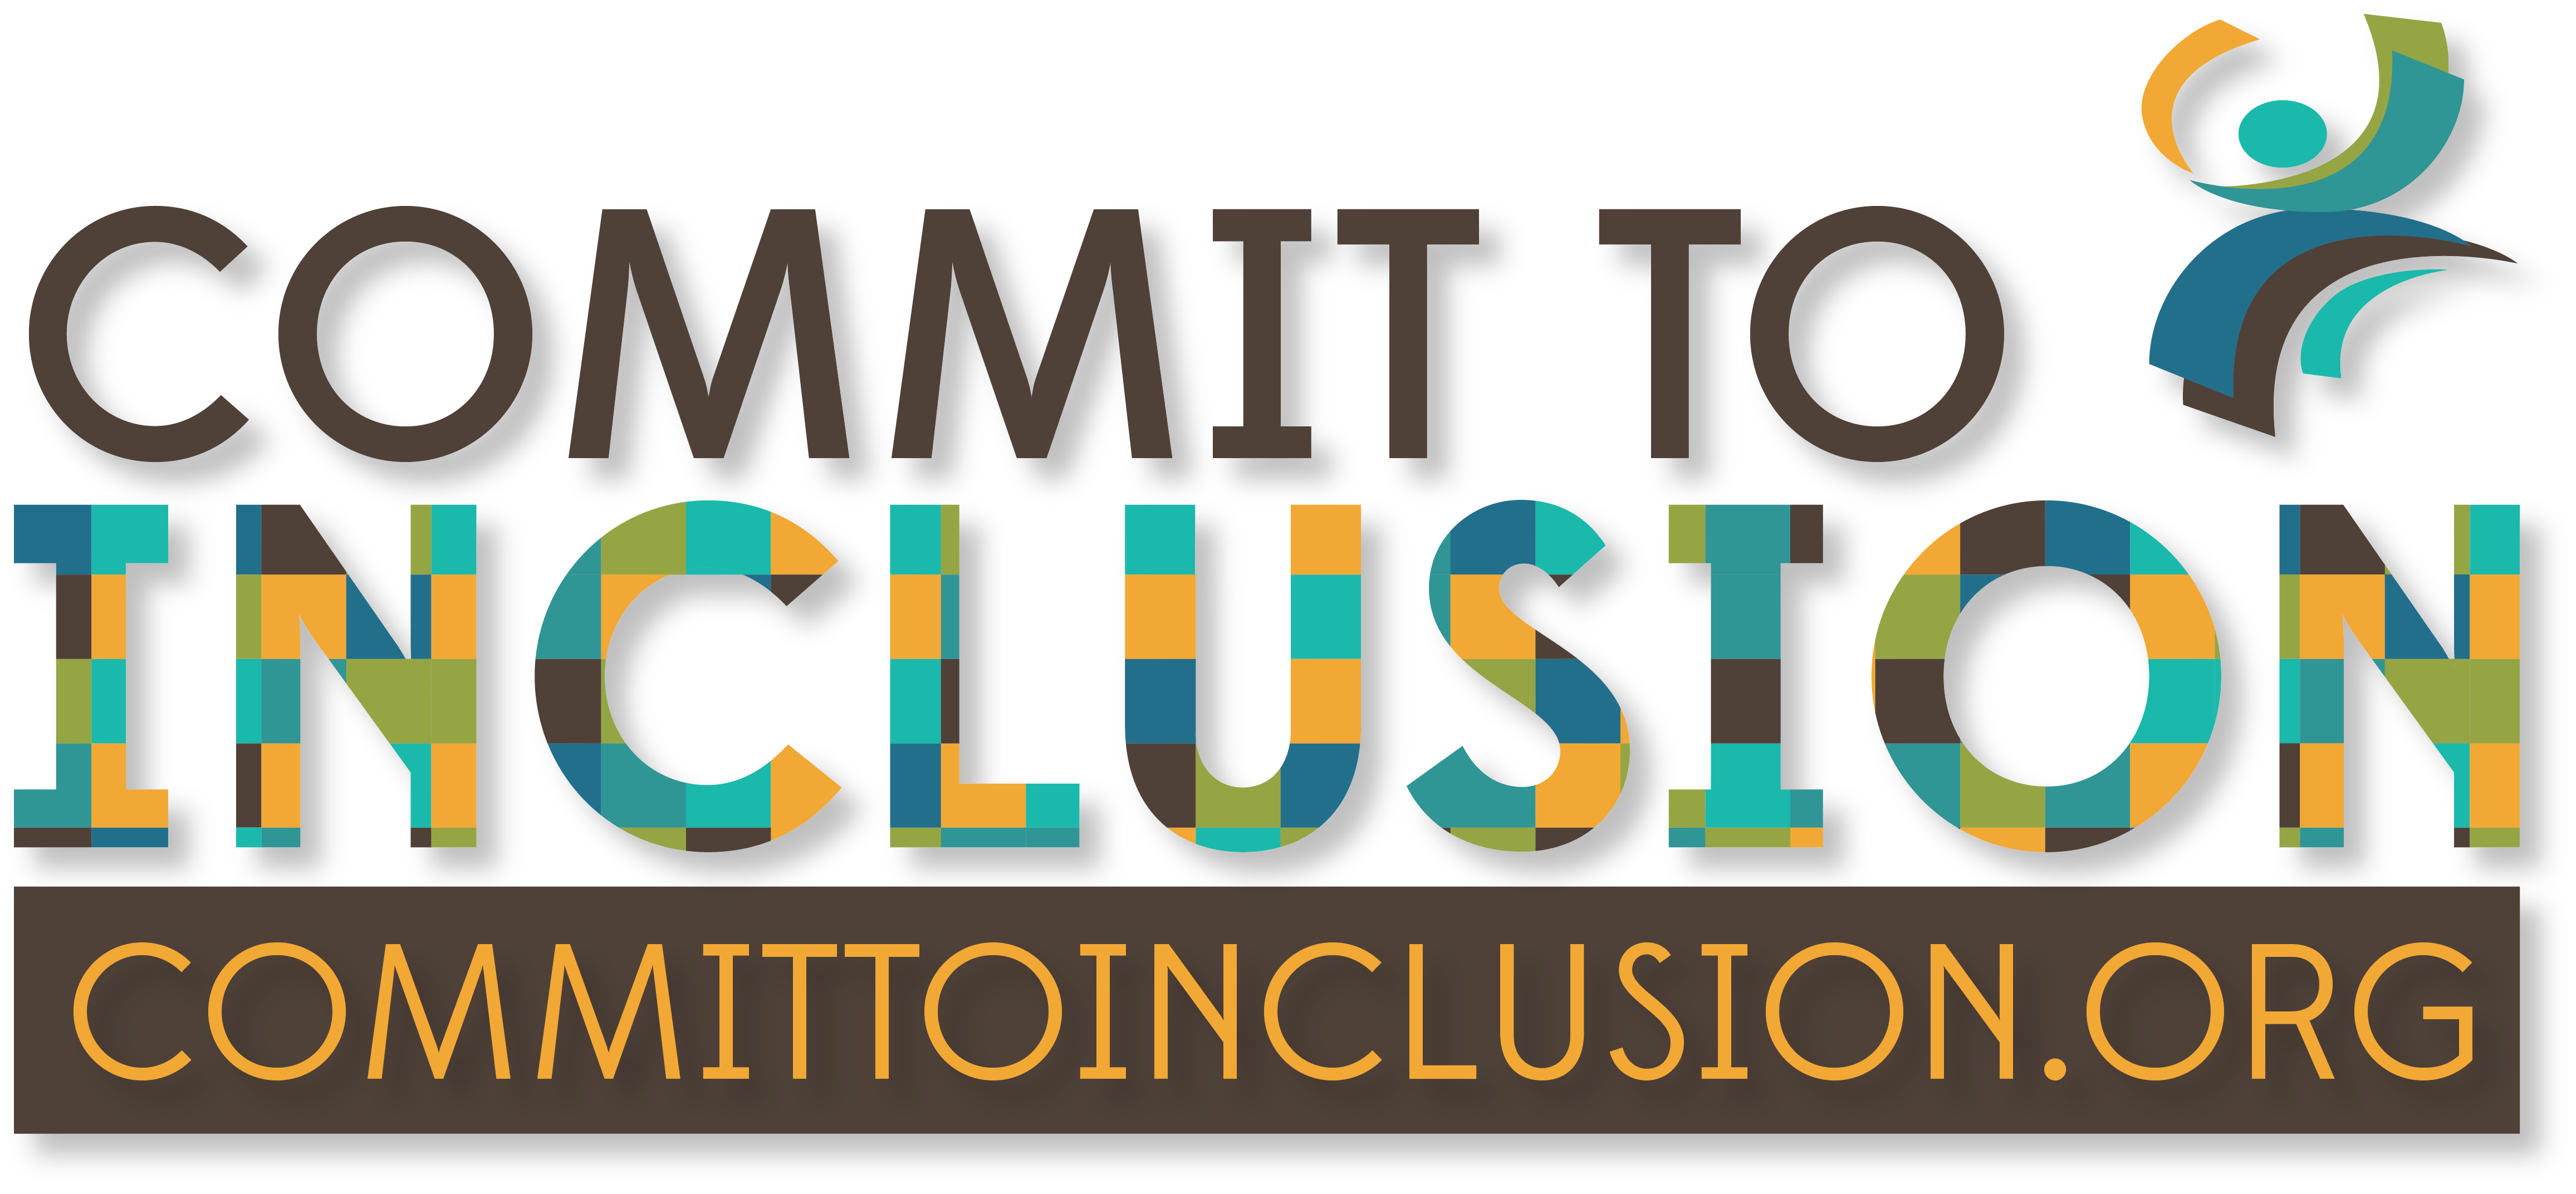 commit to inclusion logo